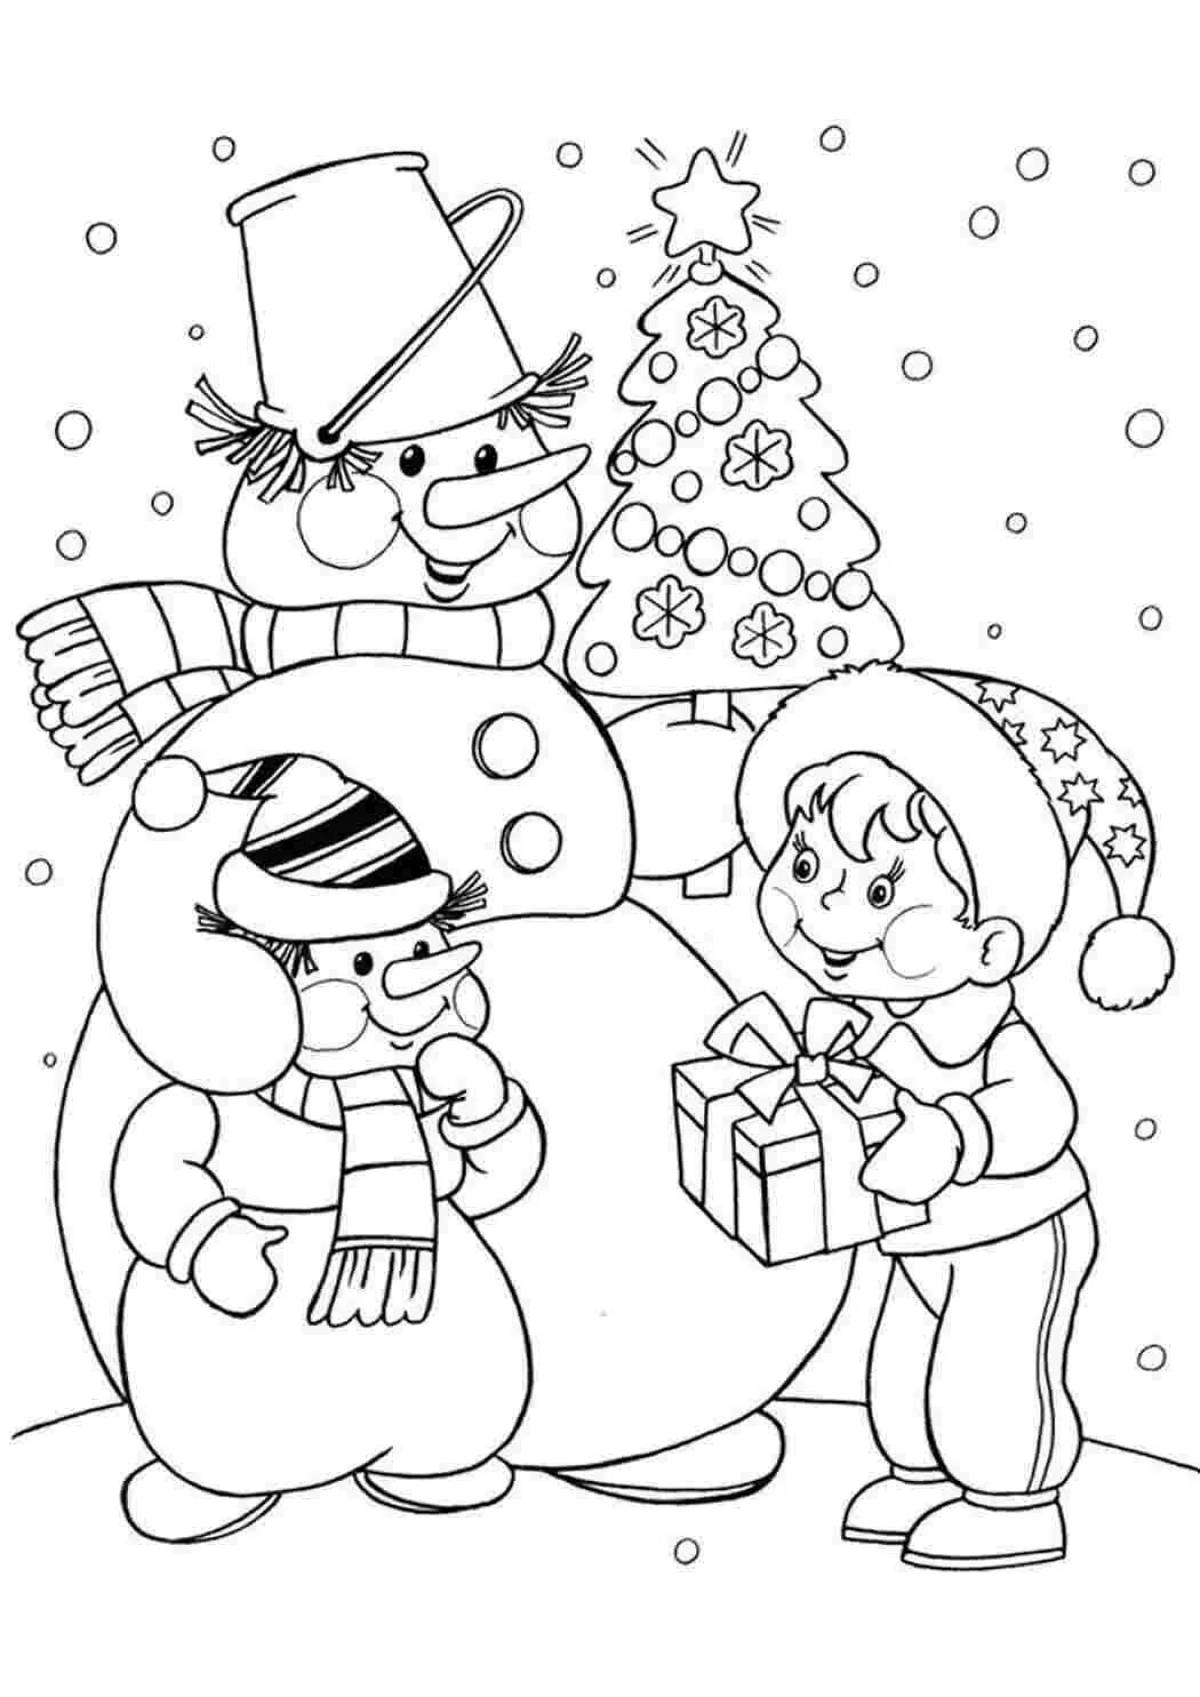 Awesome snowman coloring card